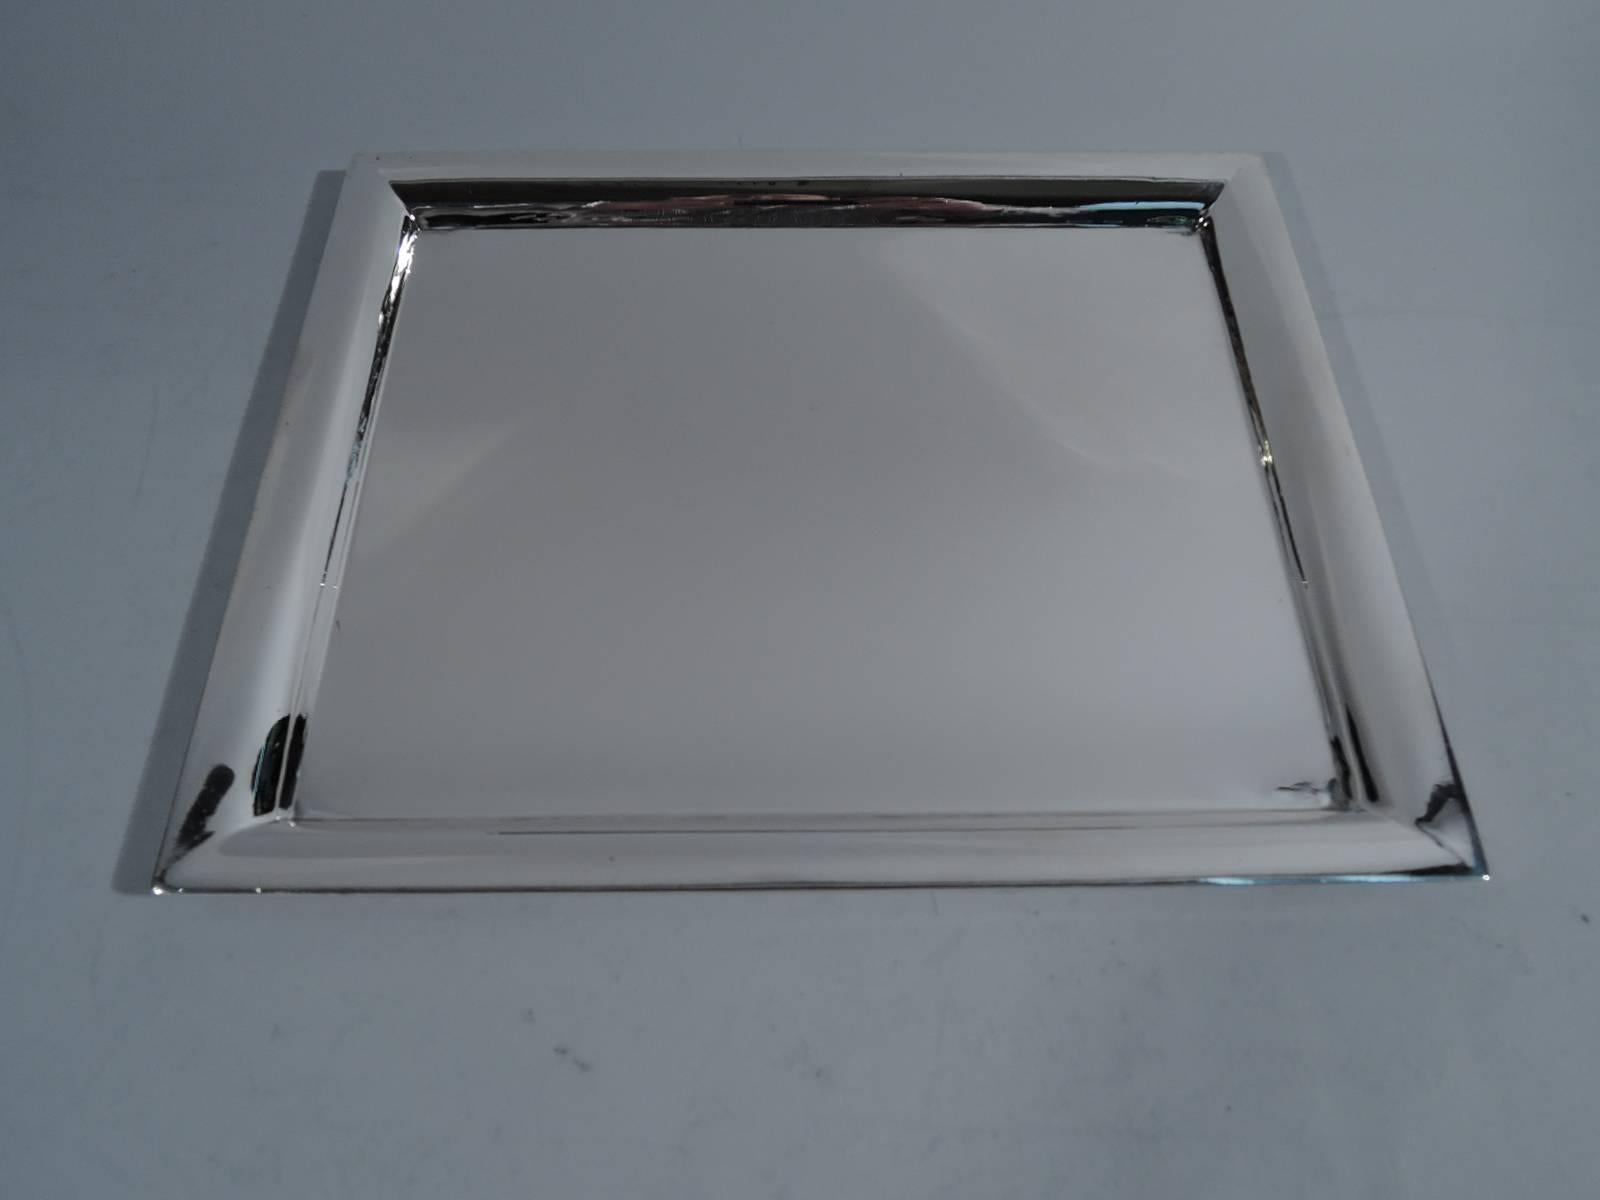 Sharp and crisp sterling silver tray. Made by Tiffany & Co. in New York, circa 1930. Rectangular with well and angular corners. Hallmark includes pattern no. 51041 and director’s letter m (1907-47). Heavy weight: 21.7 troy ounces.